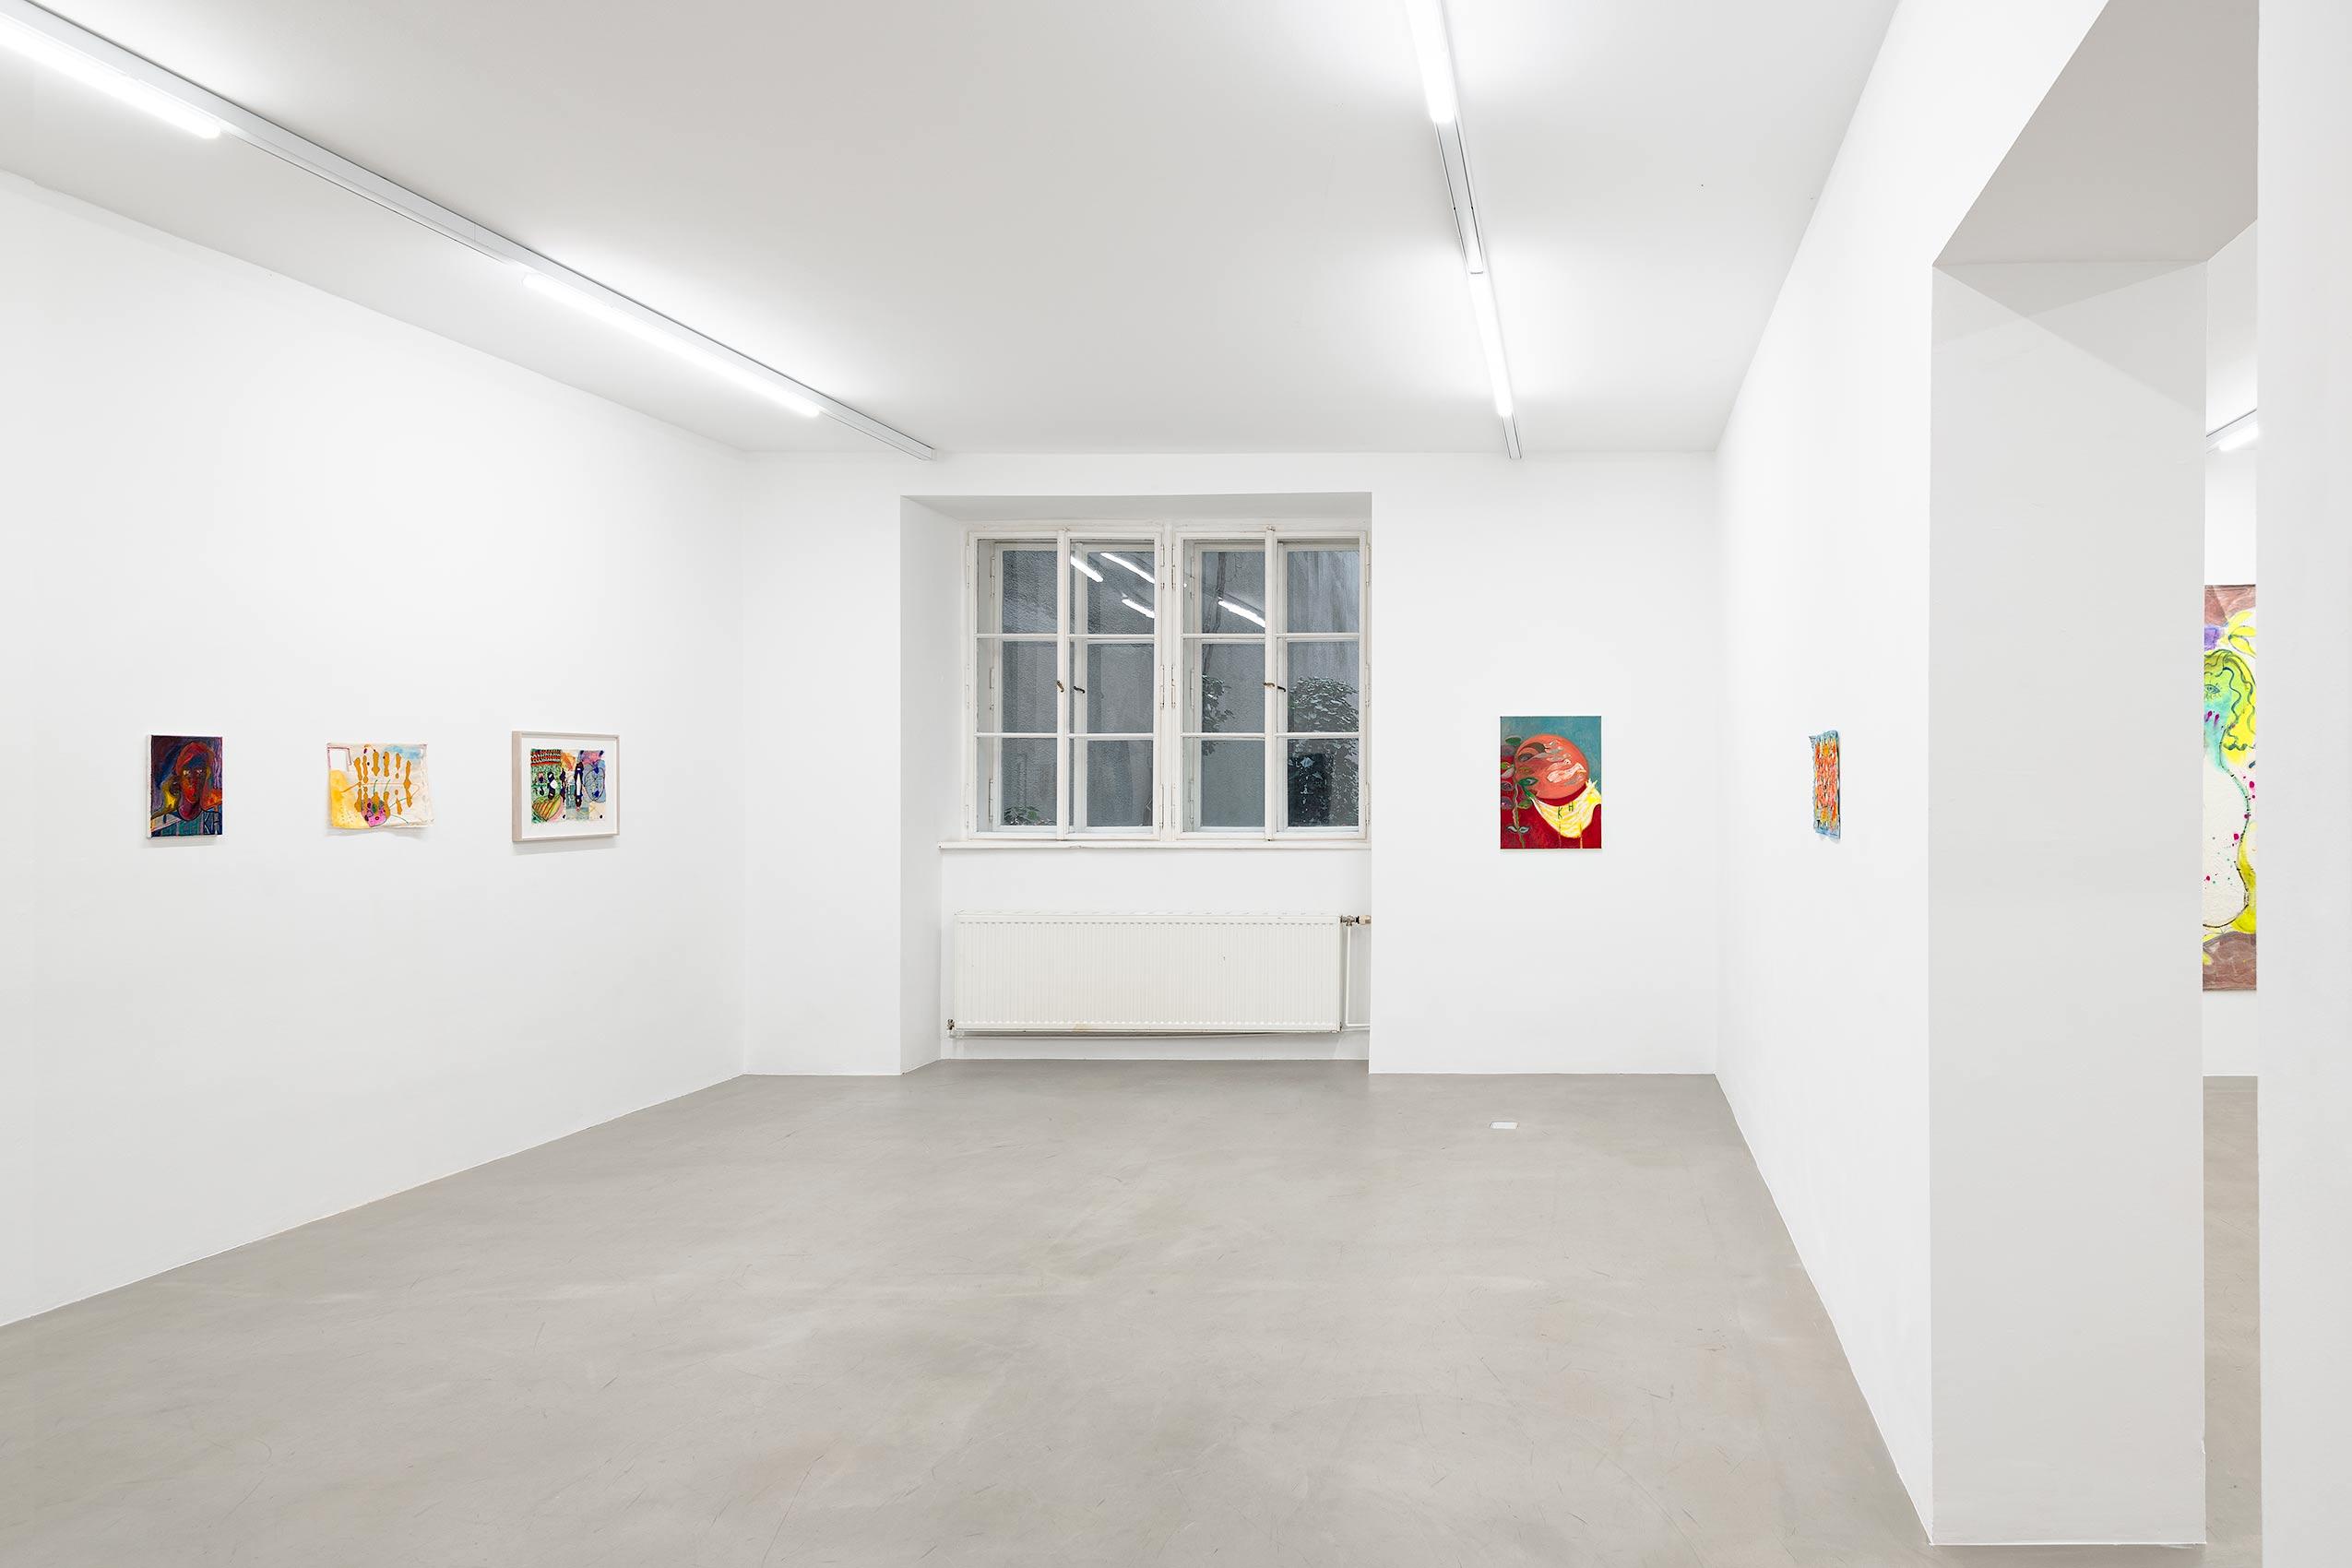 Katharina HÃ¶glinger, More Hours than One Day, installation view, Wonnerth Dejaco, Vienna 2022. Courtesy of Wonnerth Dejaco and the artist. Photo: Peter Mochi